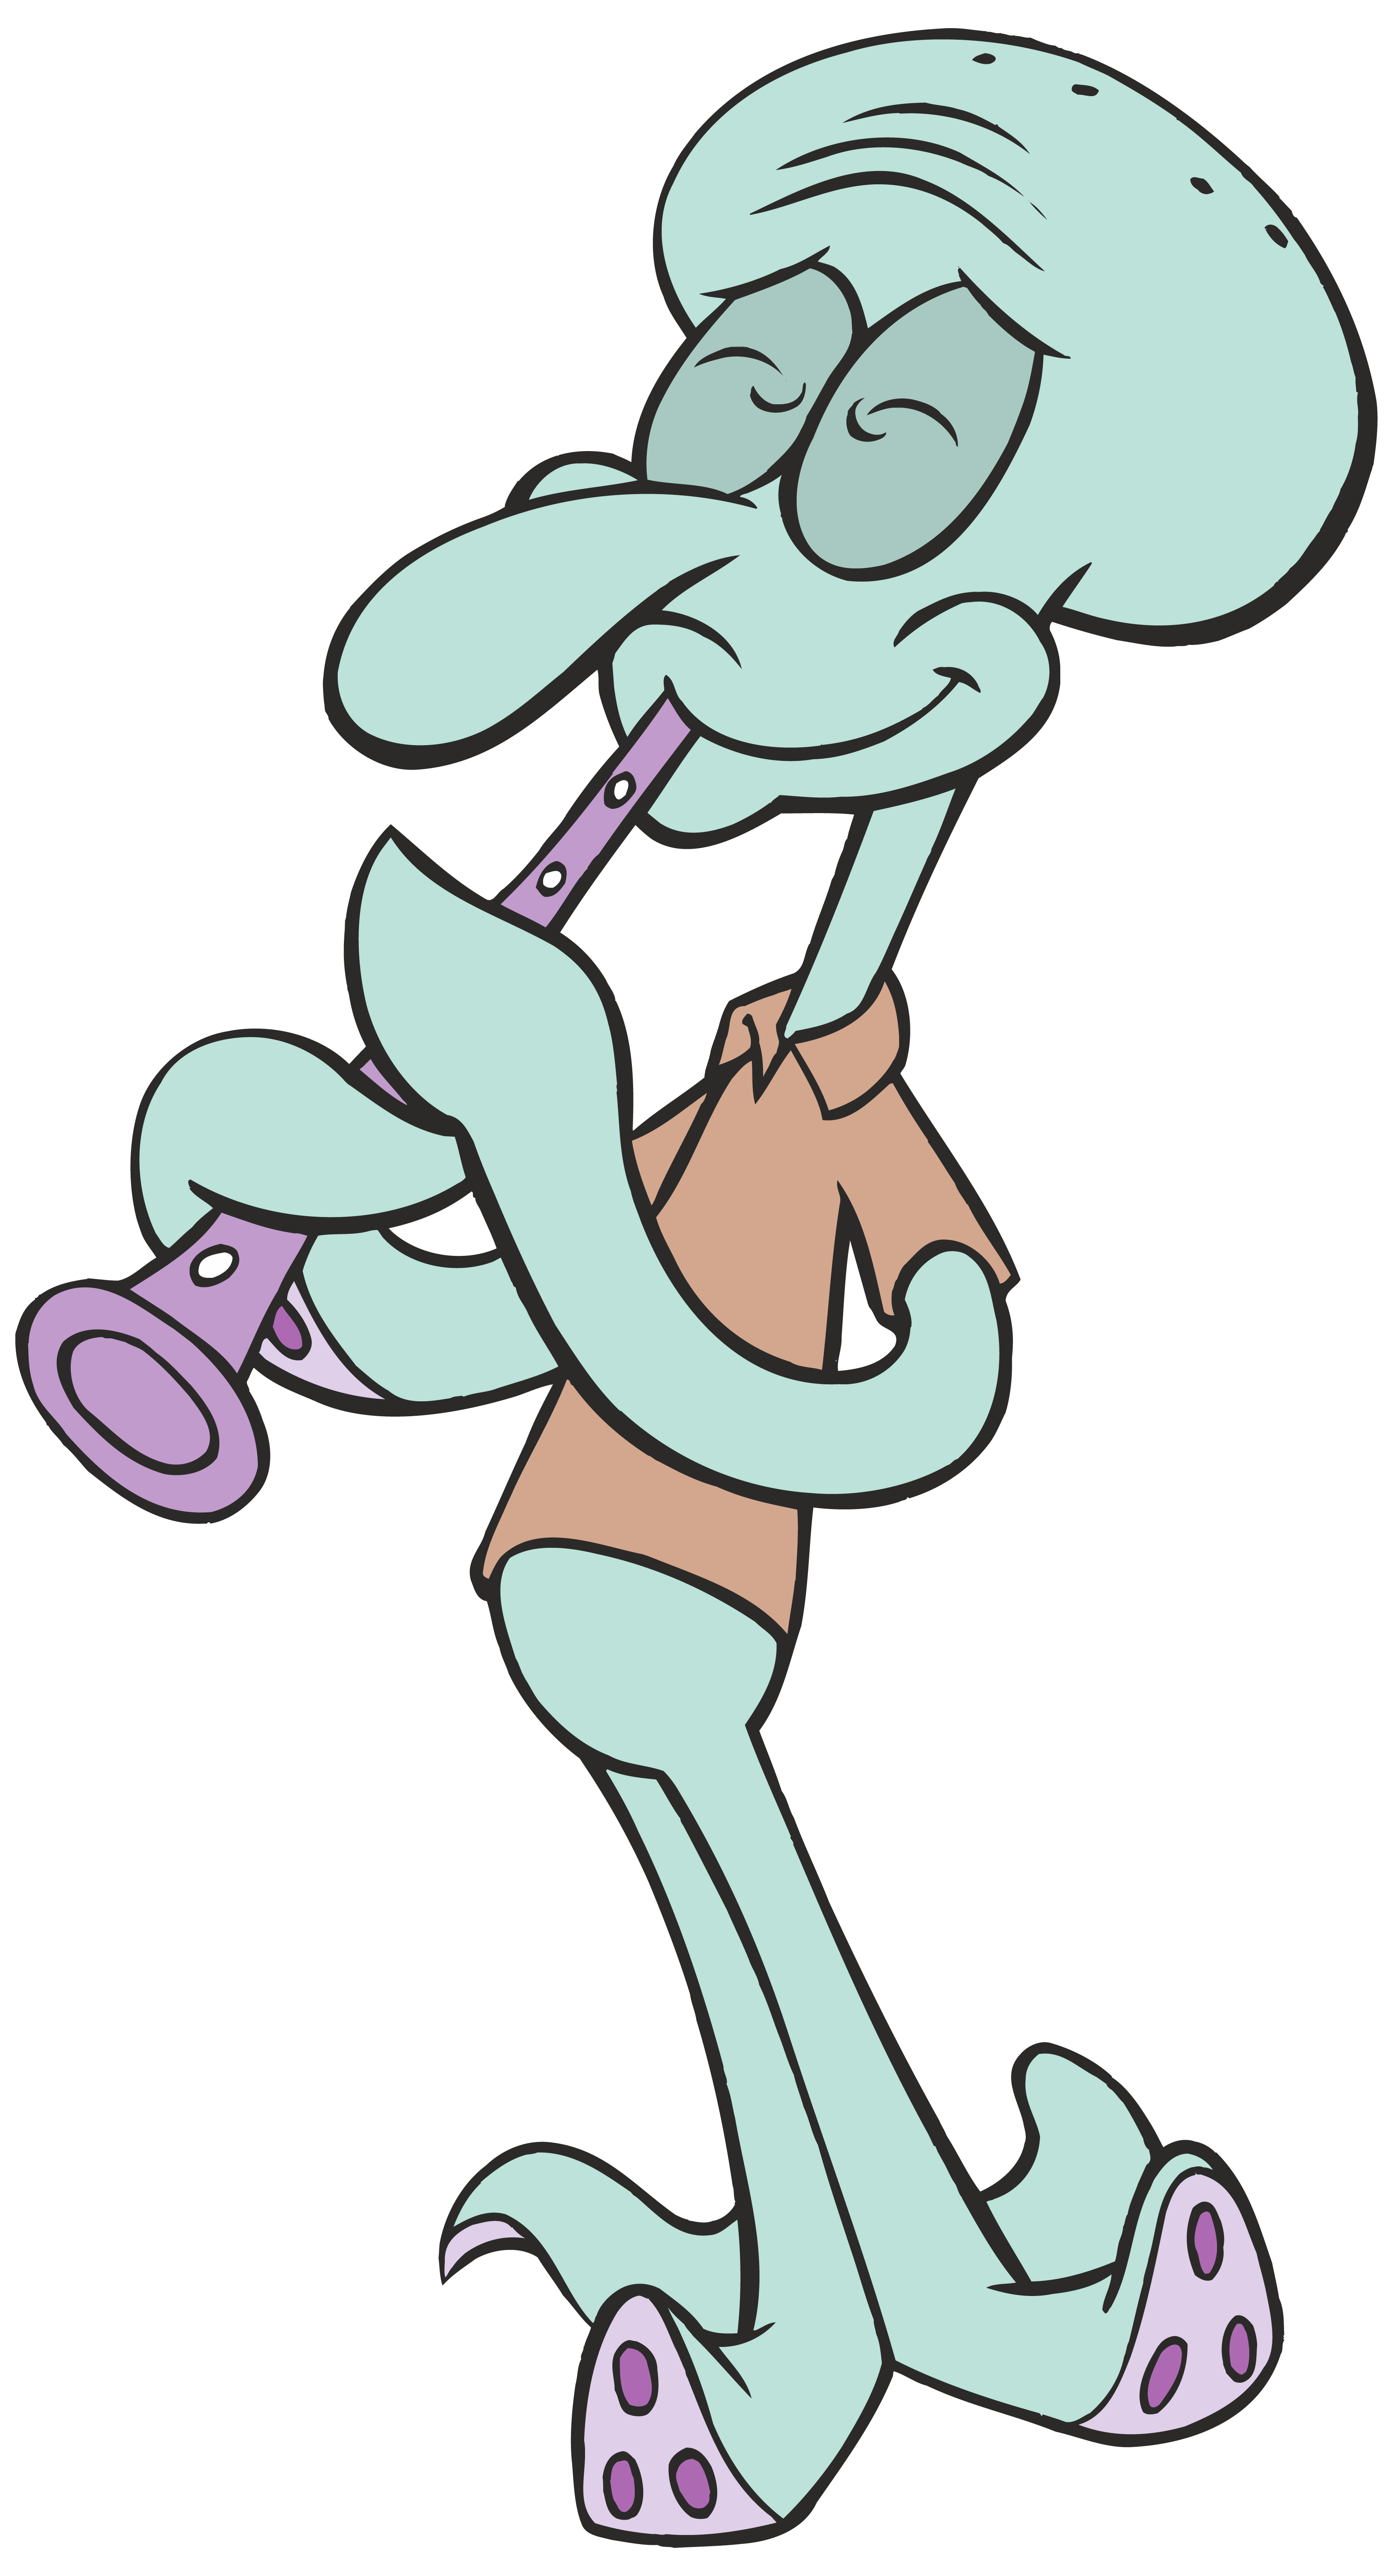 Growth clipart height. Squidward tentacles spongebob png